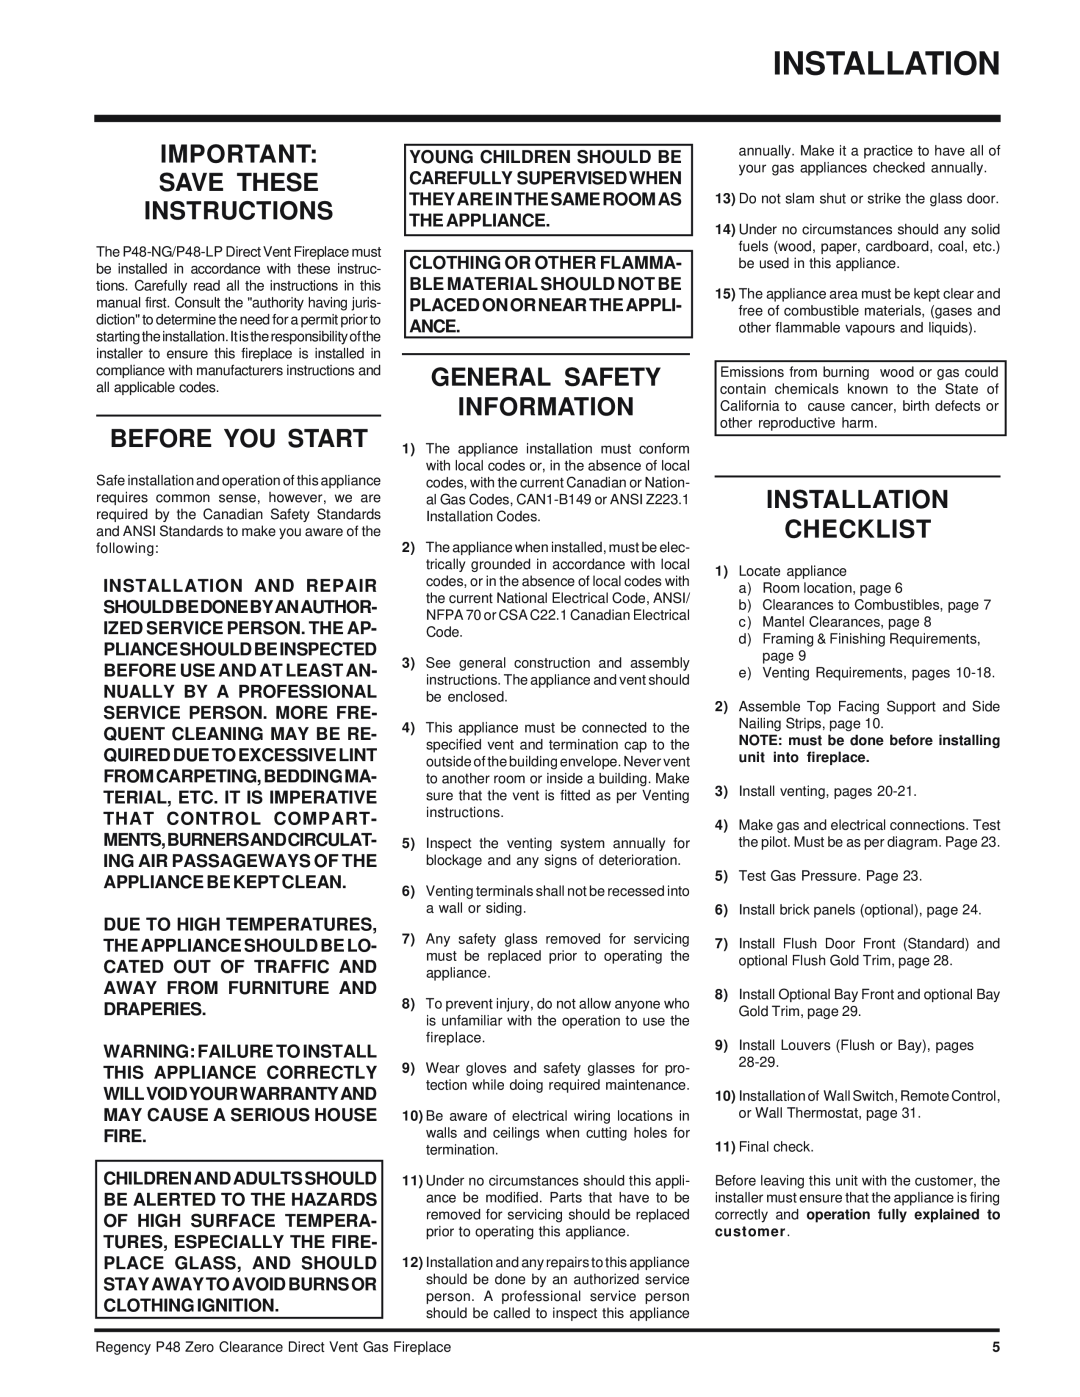 Regency P48-LP, P48-NG Save These Instructions, Before You Start, General Safety Information, Installation Checklist 